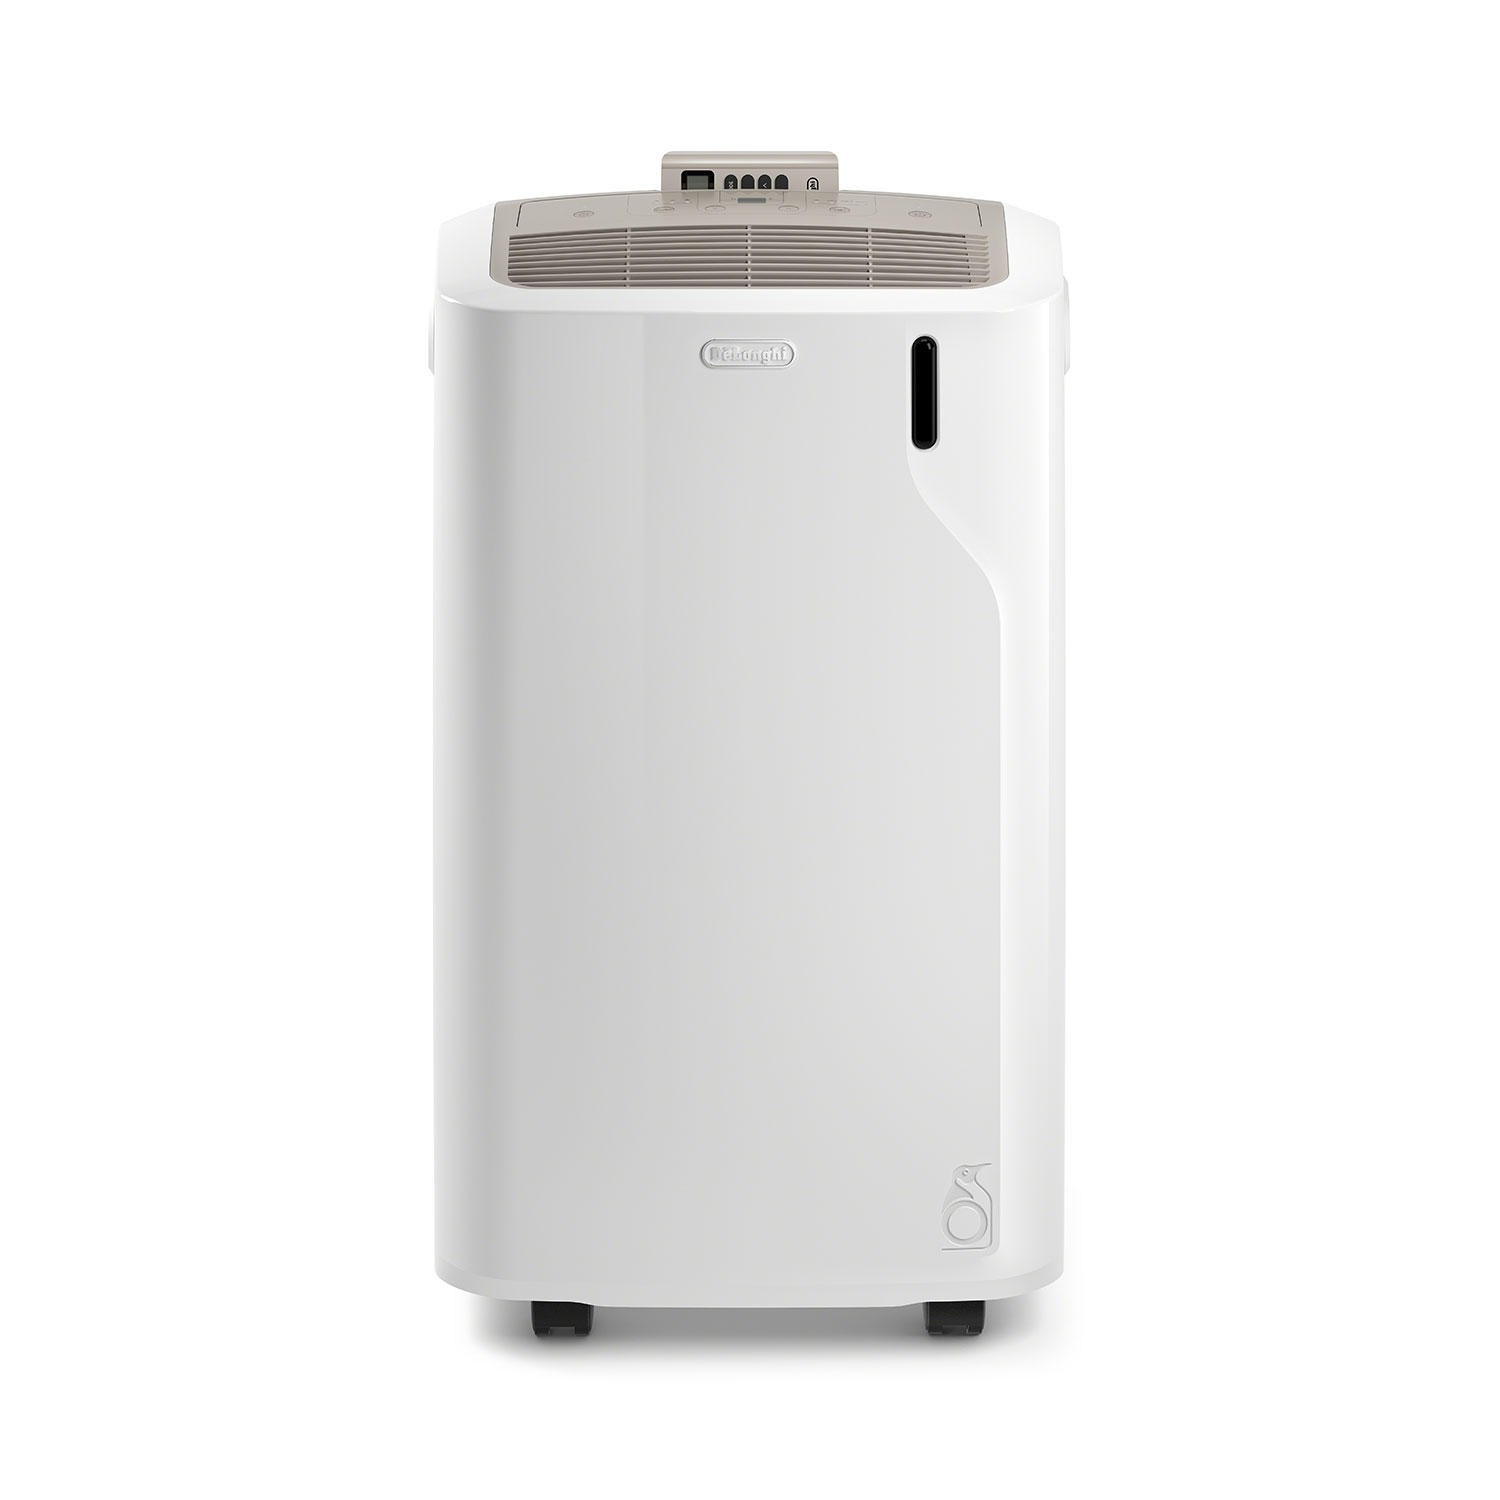 Sam's Club Members: DeLonghi Pinguino PACEM369S 500 Sq ft Portable Air Conditioner $349 after Instant Savings